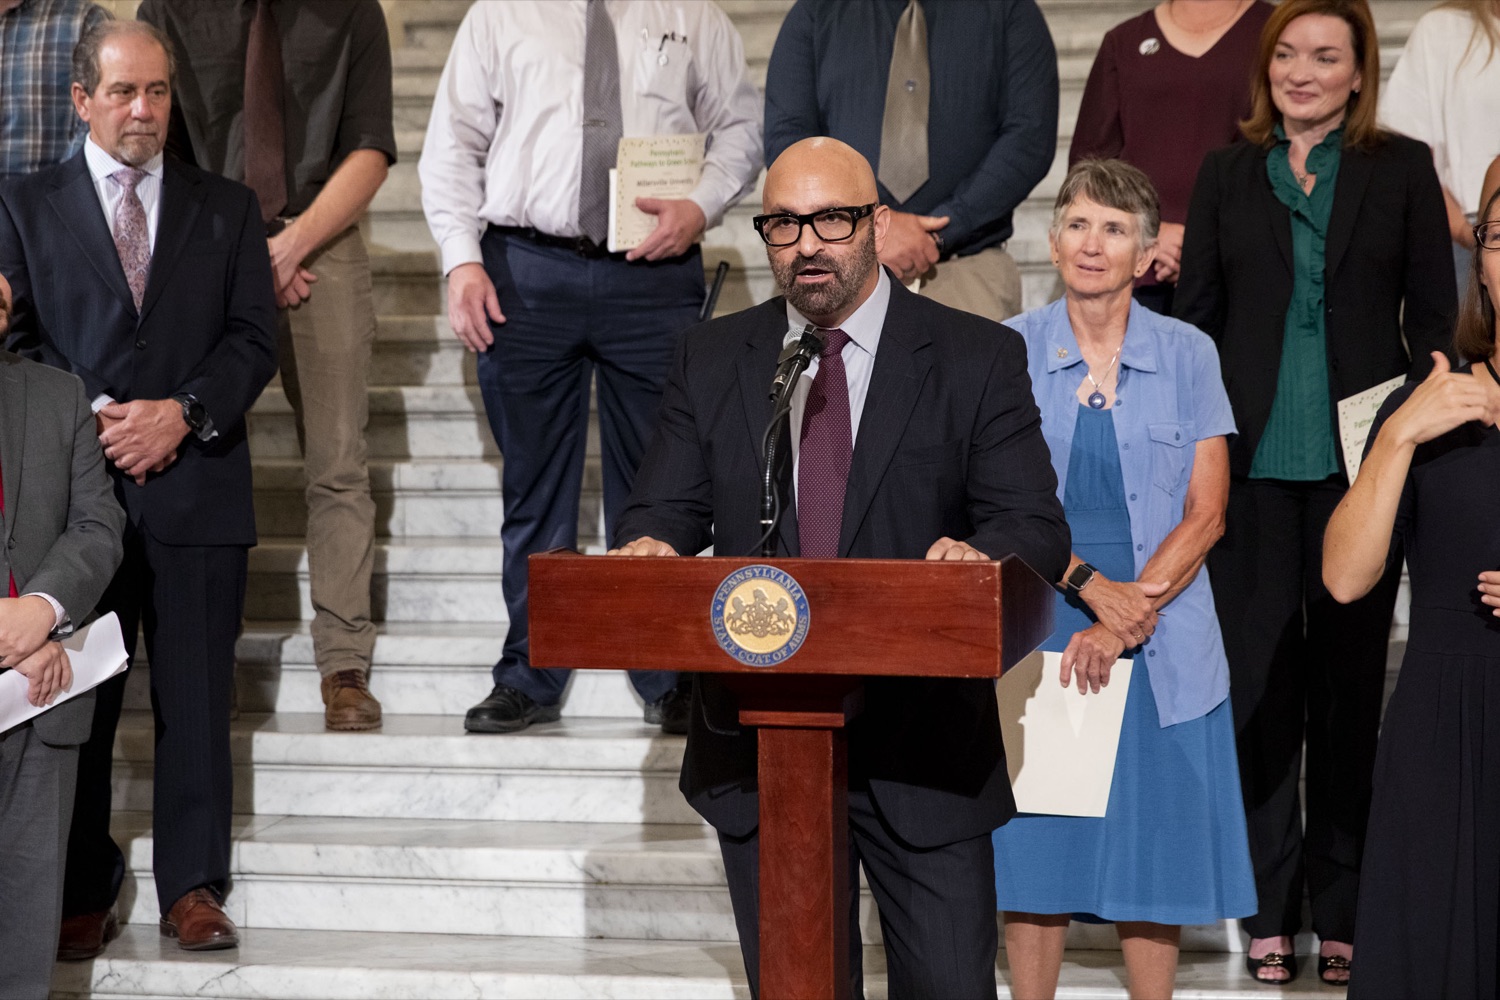 Ramez Ziadeh, Acting Secretary, Department of Environmental Protection, congratulates the individuals working towards healthy and environmentally friendly schools, in Harrisburg, PA on September 20, 2022.<br><a href="https://filesource.amperwave.net/commonwealthofpa/photo/22151_dcnr_pathways_cz_07.jpg" target="_blank">⇣ Download Photo</a>